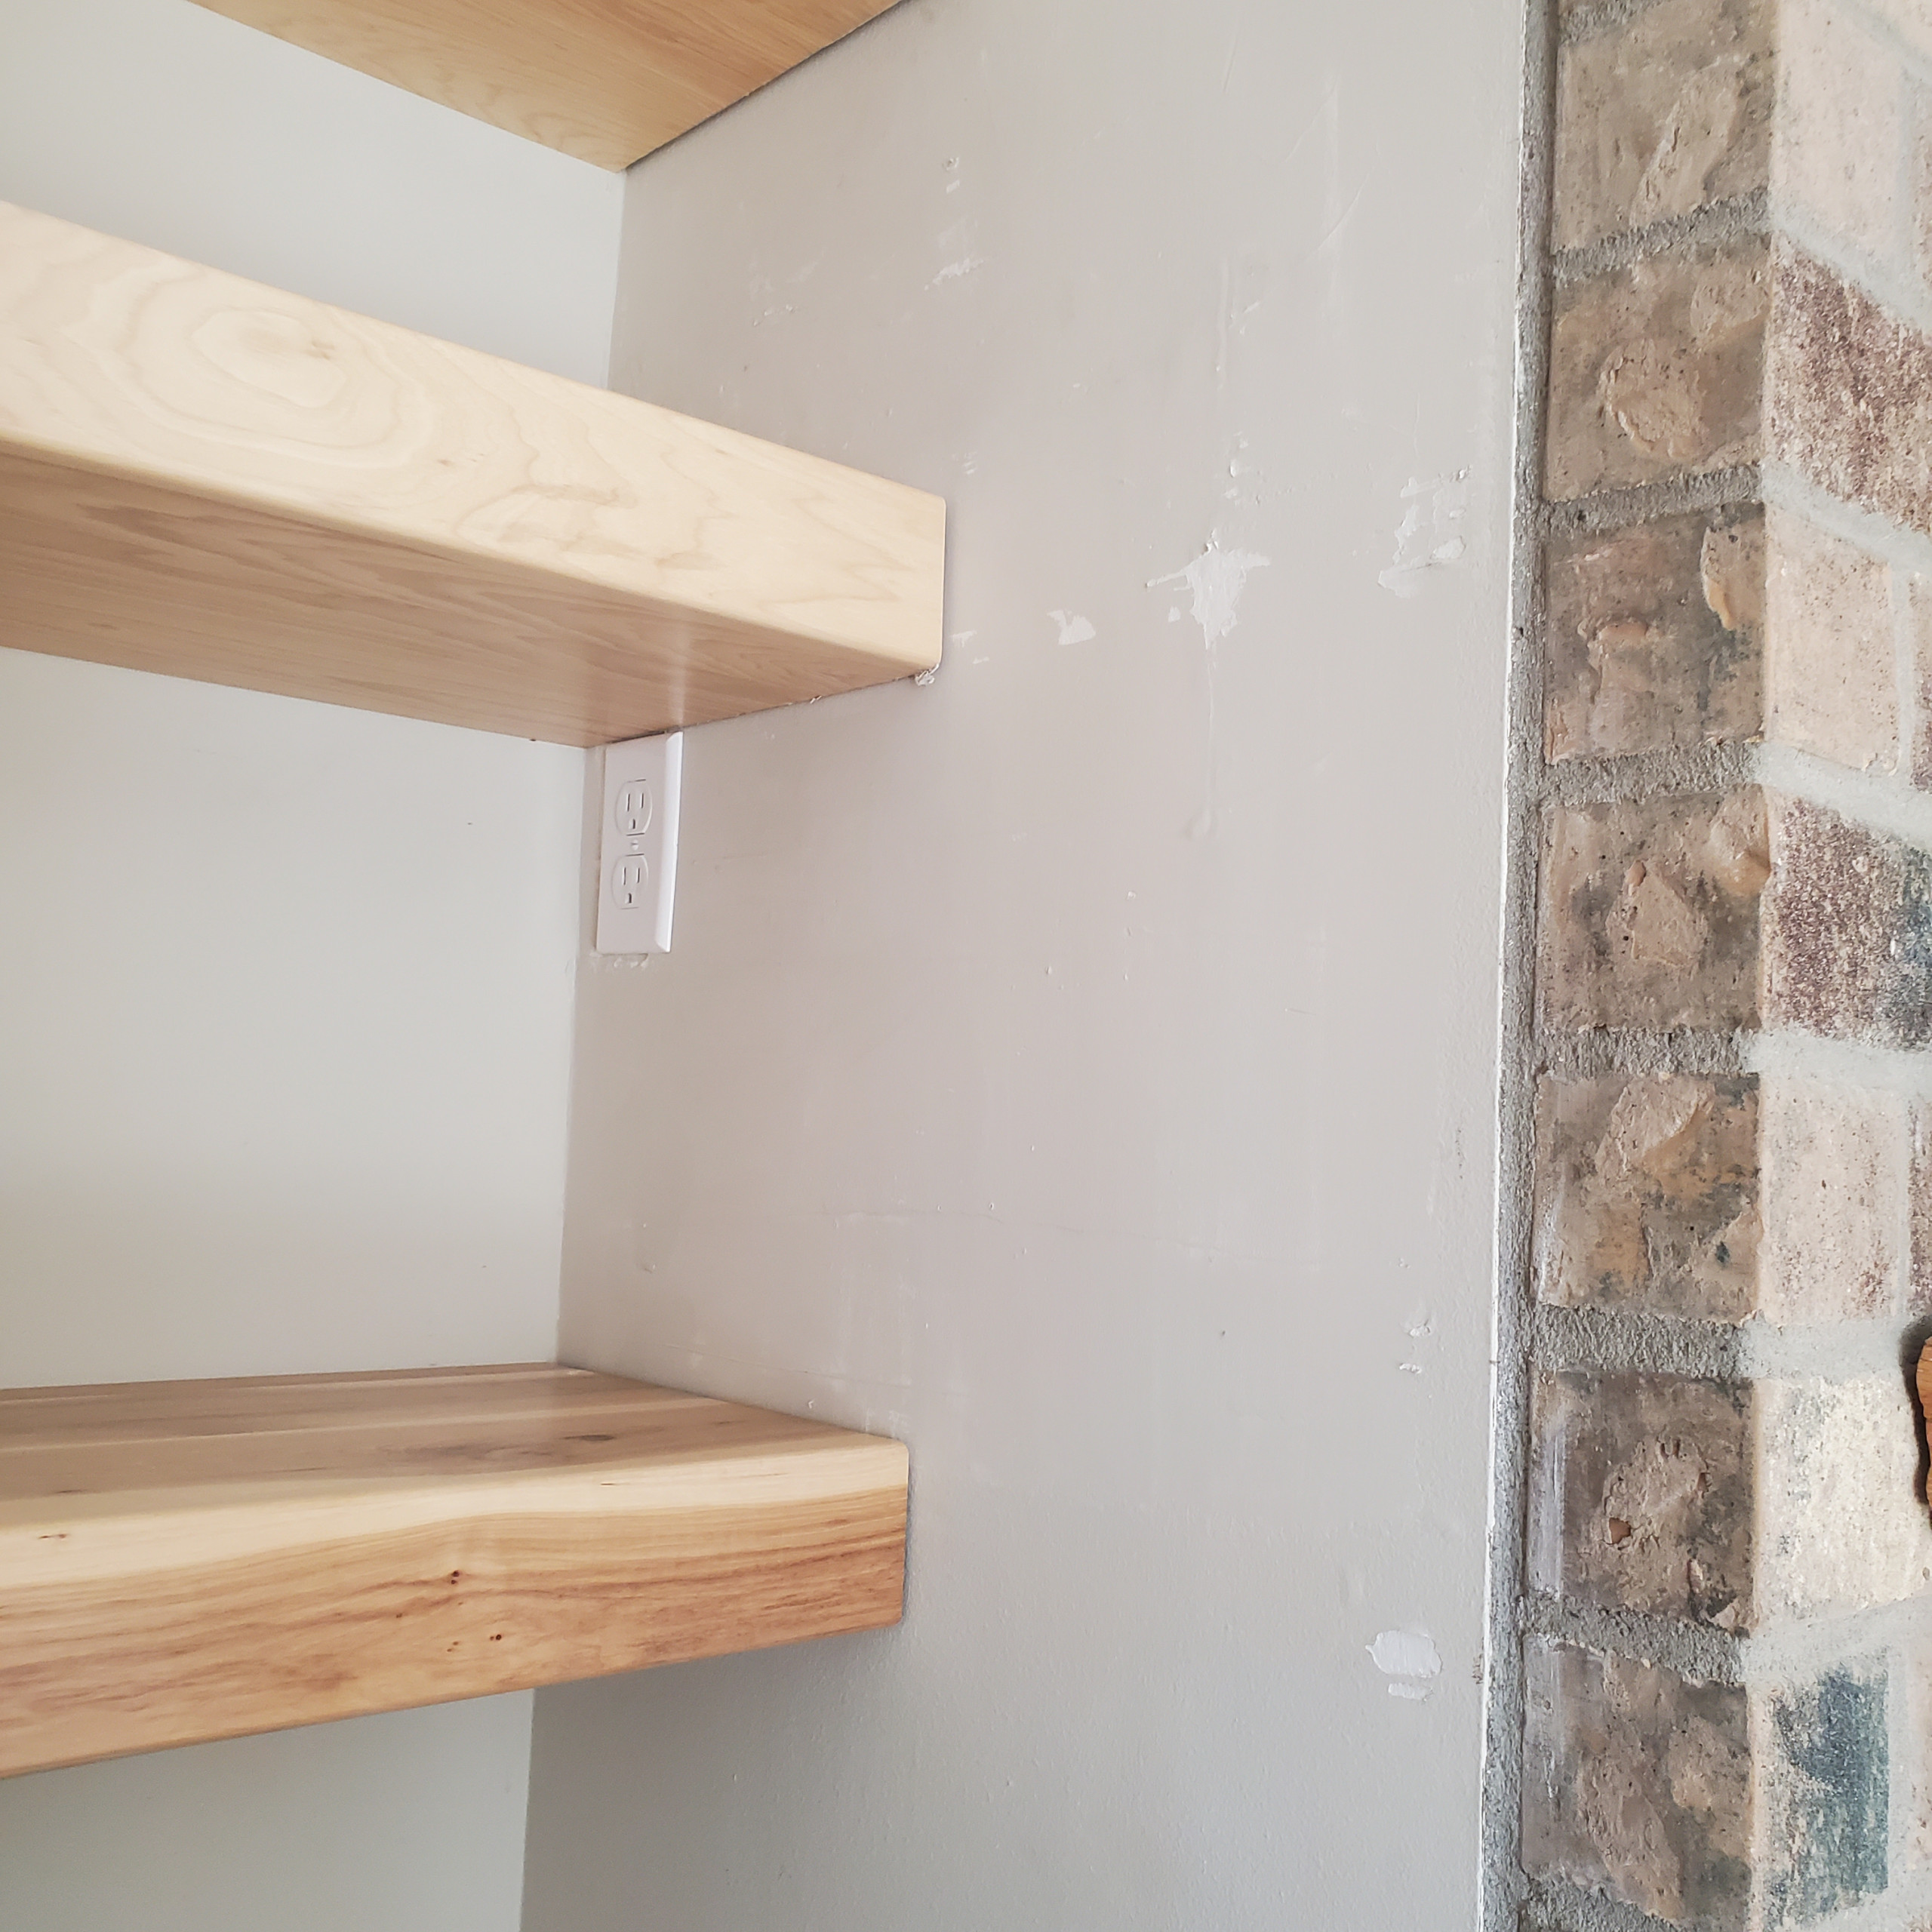 Hickory floating shelves and cabinets